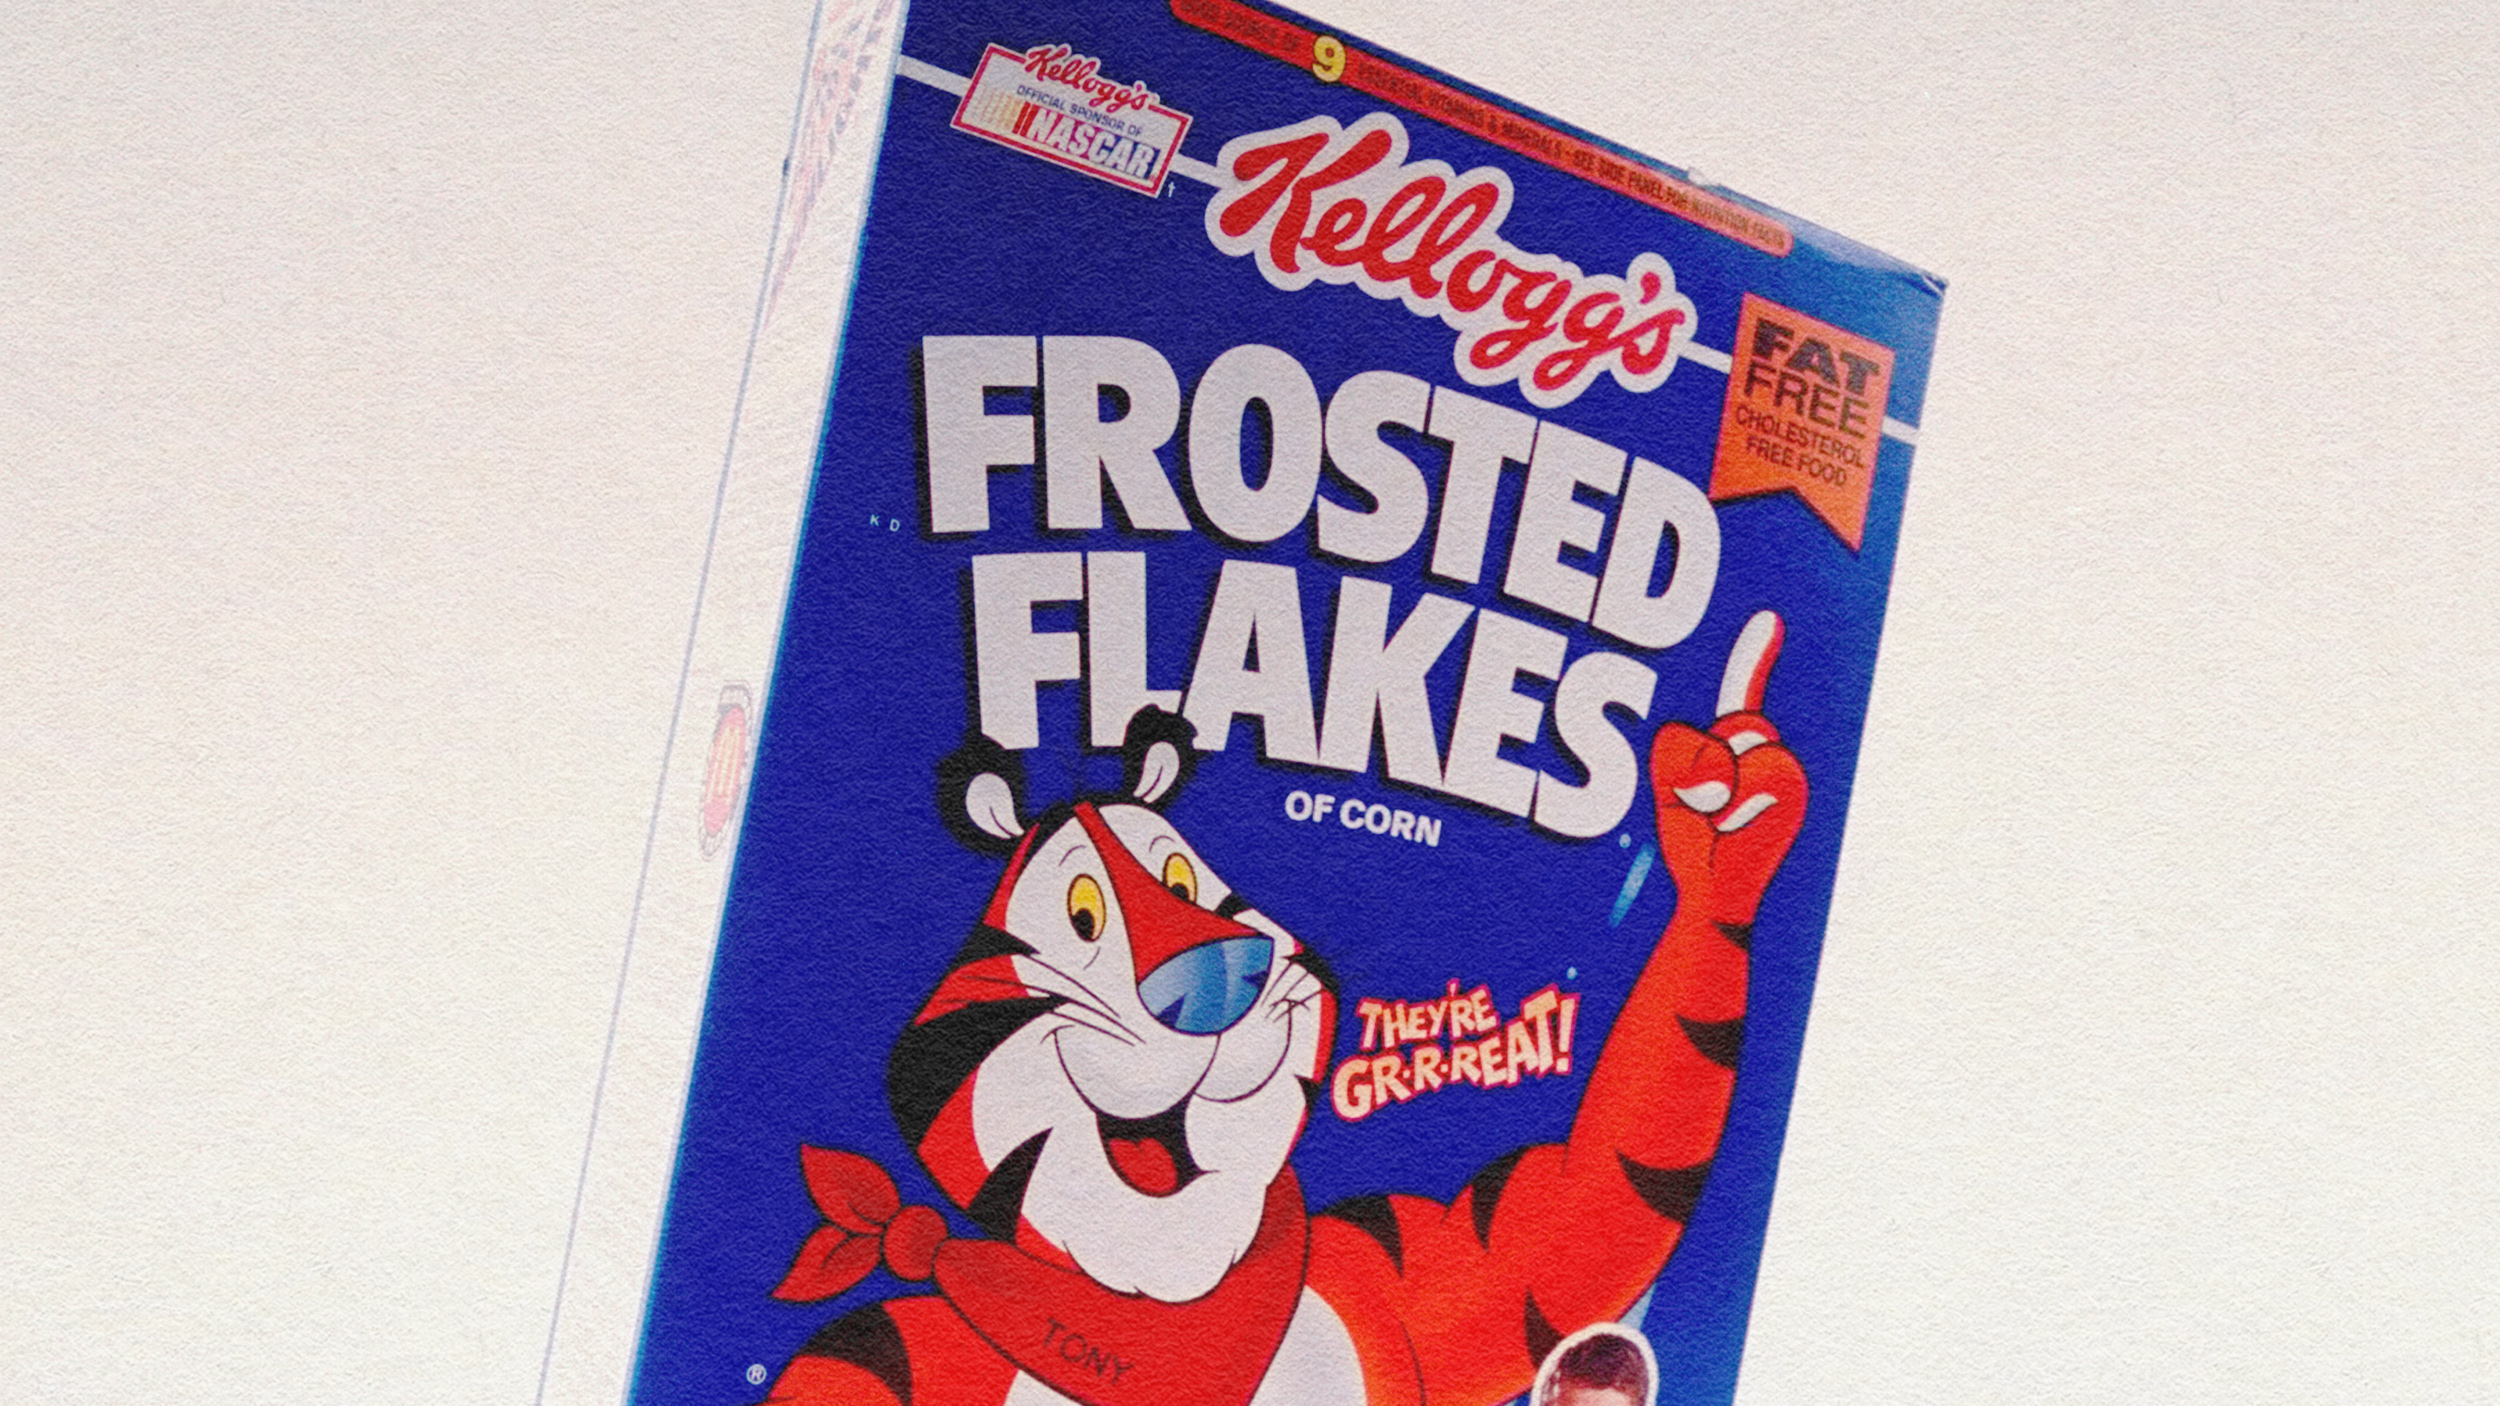 A box of processed kellogs frosted flakes.